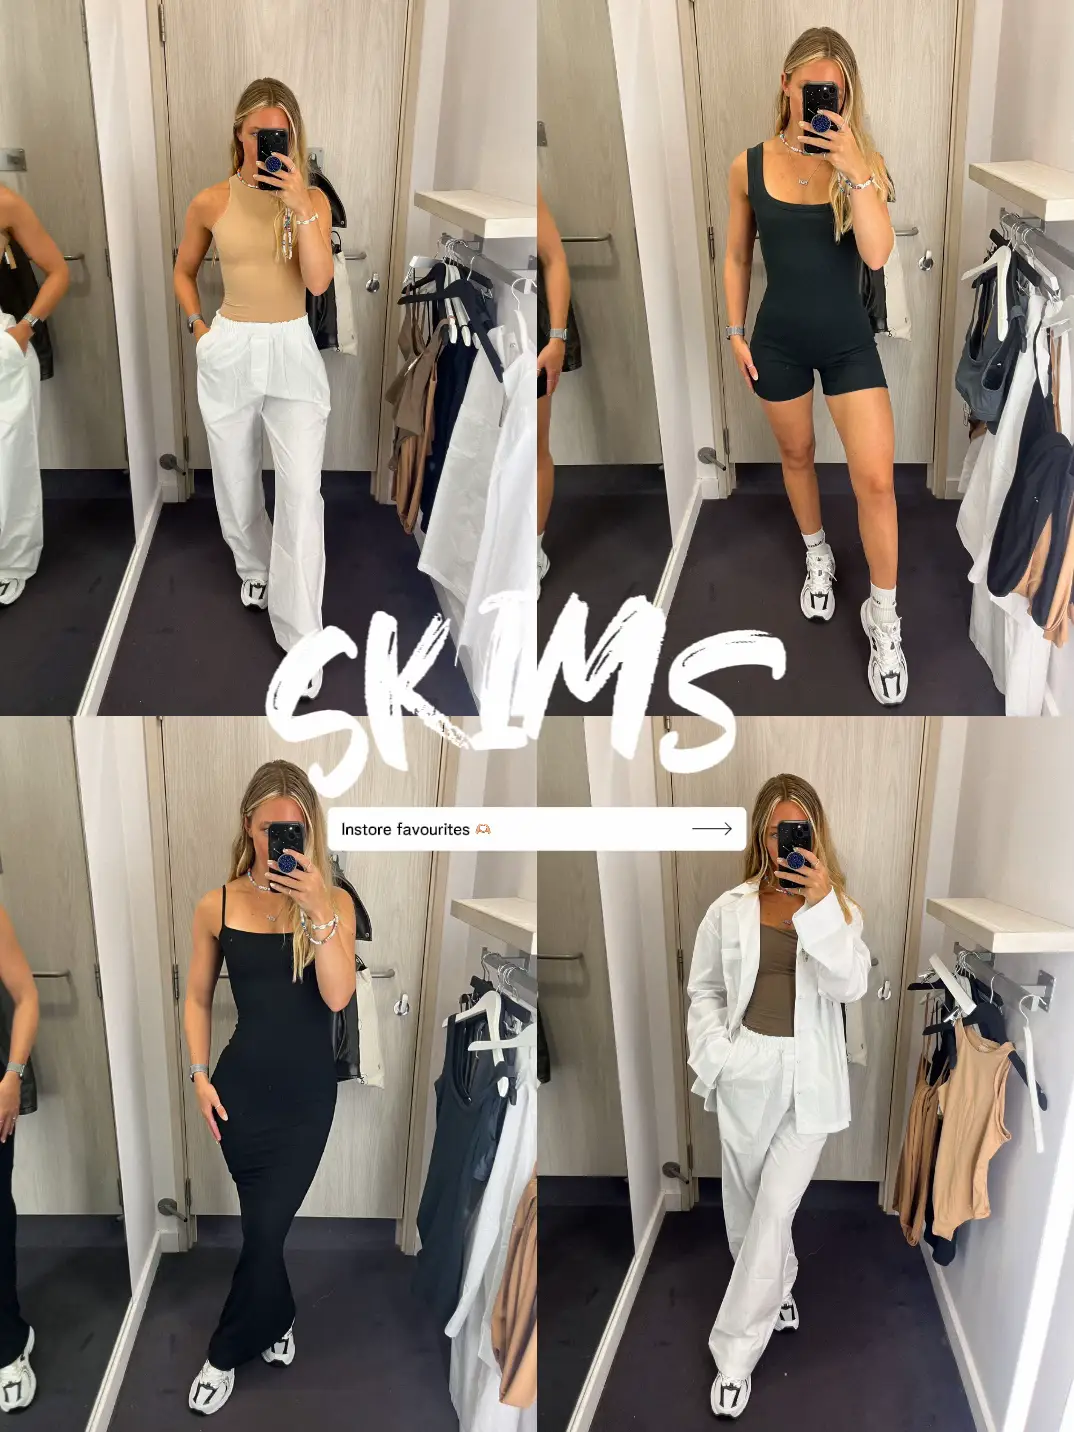 I'm 5'7” - the Skims 'fits everybody' bodysuit didn't work for me, you can  tell Kim Kardashian designs for short women